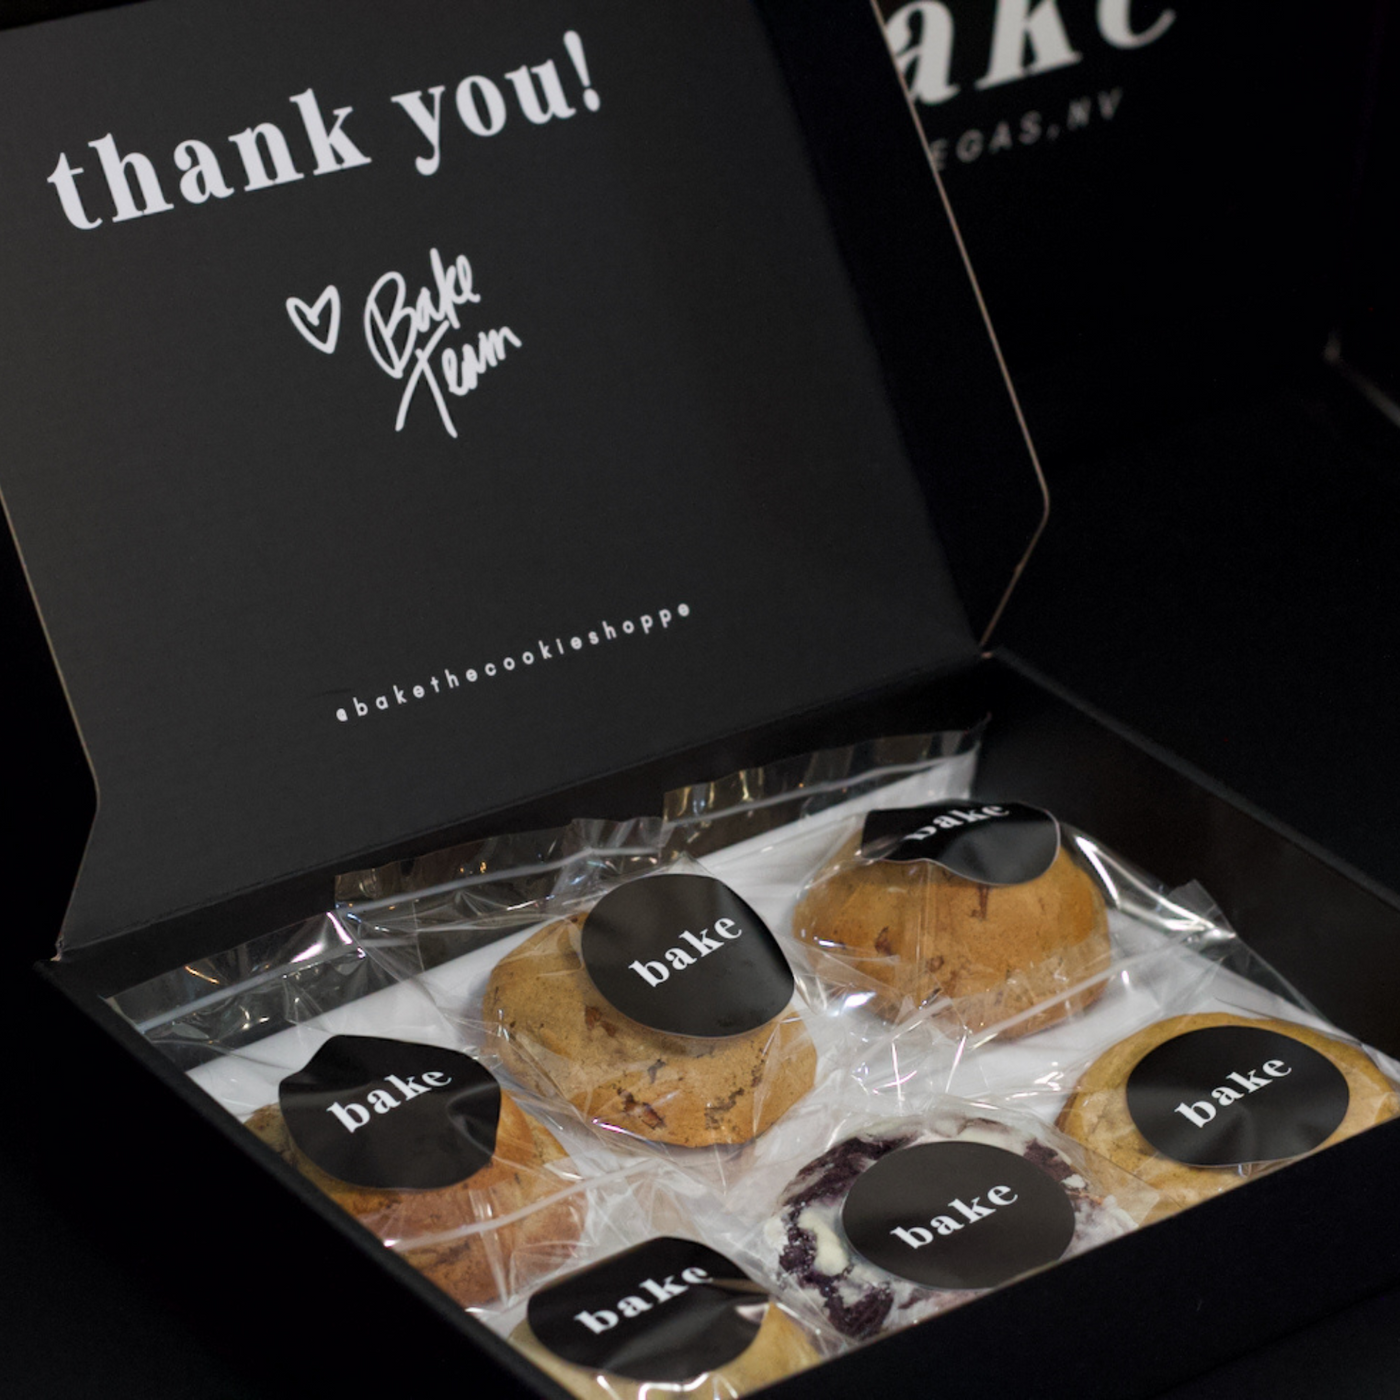 Box of 6 Cookies inside the black bake the cookie shoppe box with the Thank you message from bake.